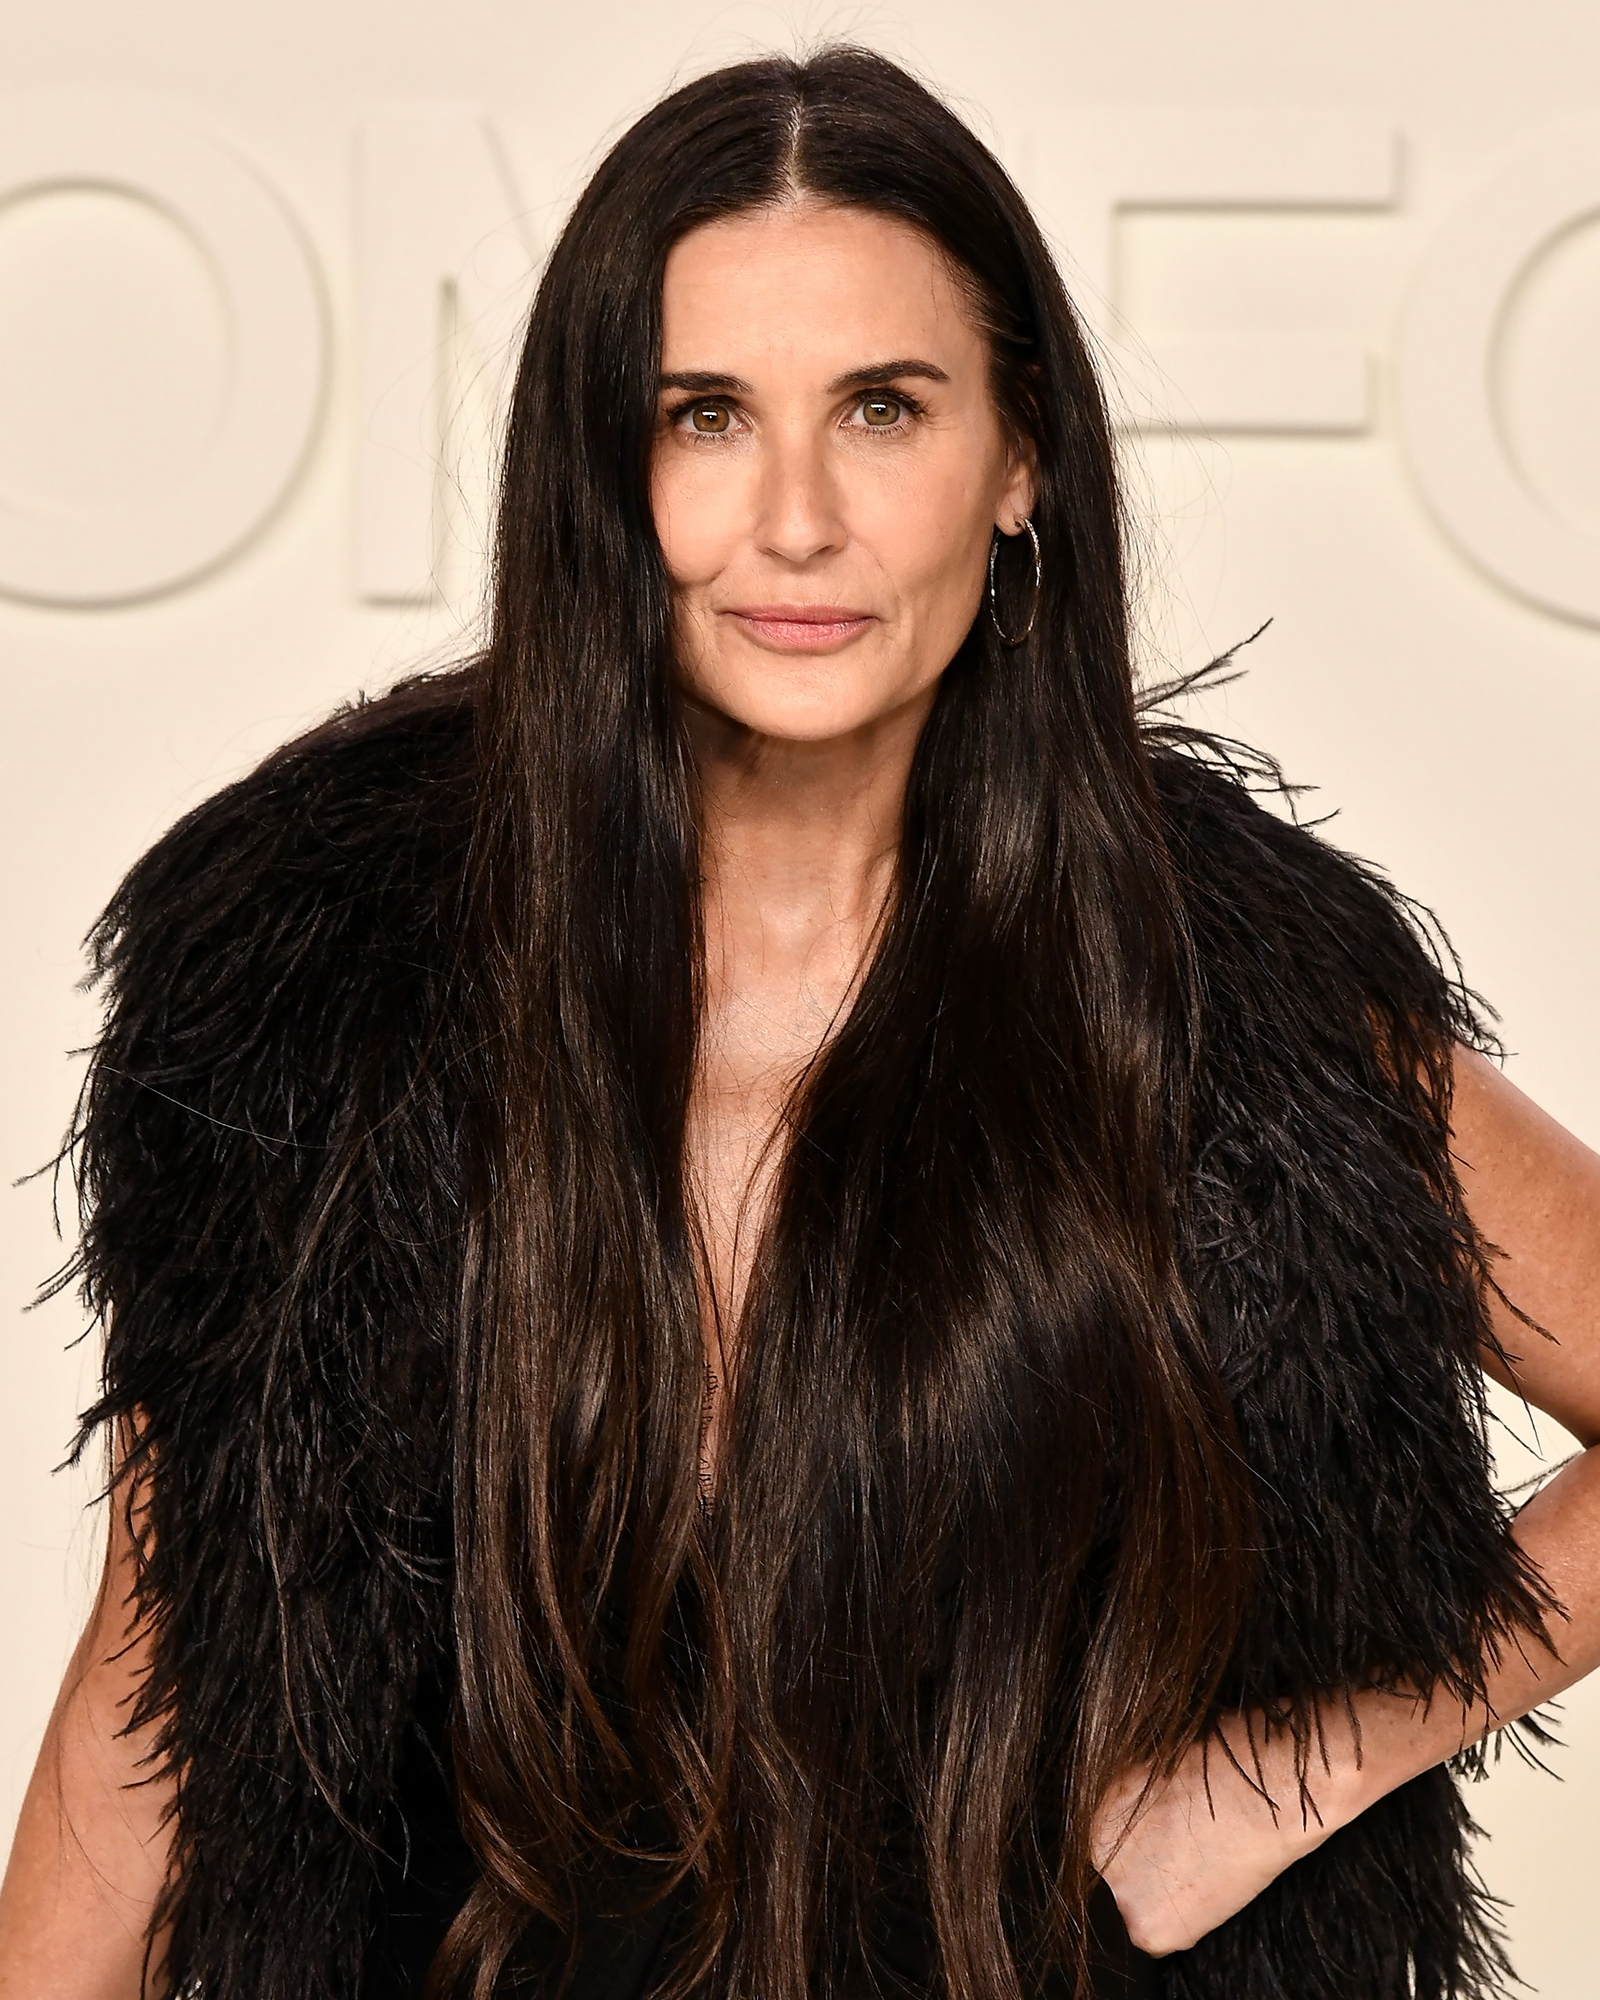 Demi Moore S Most Iconic Films Ranked vrogue.co